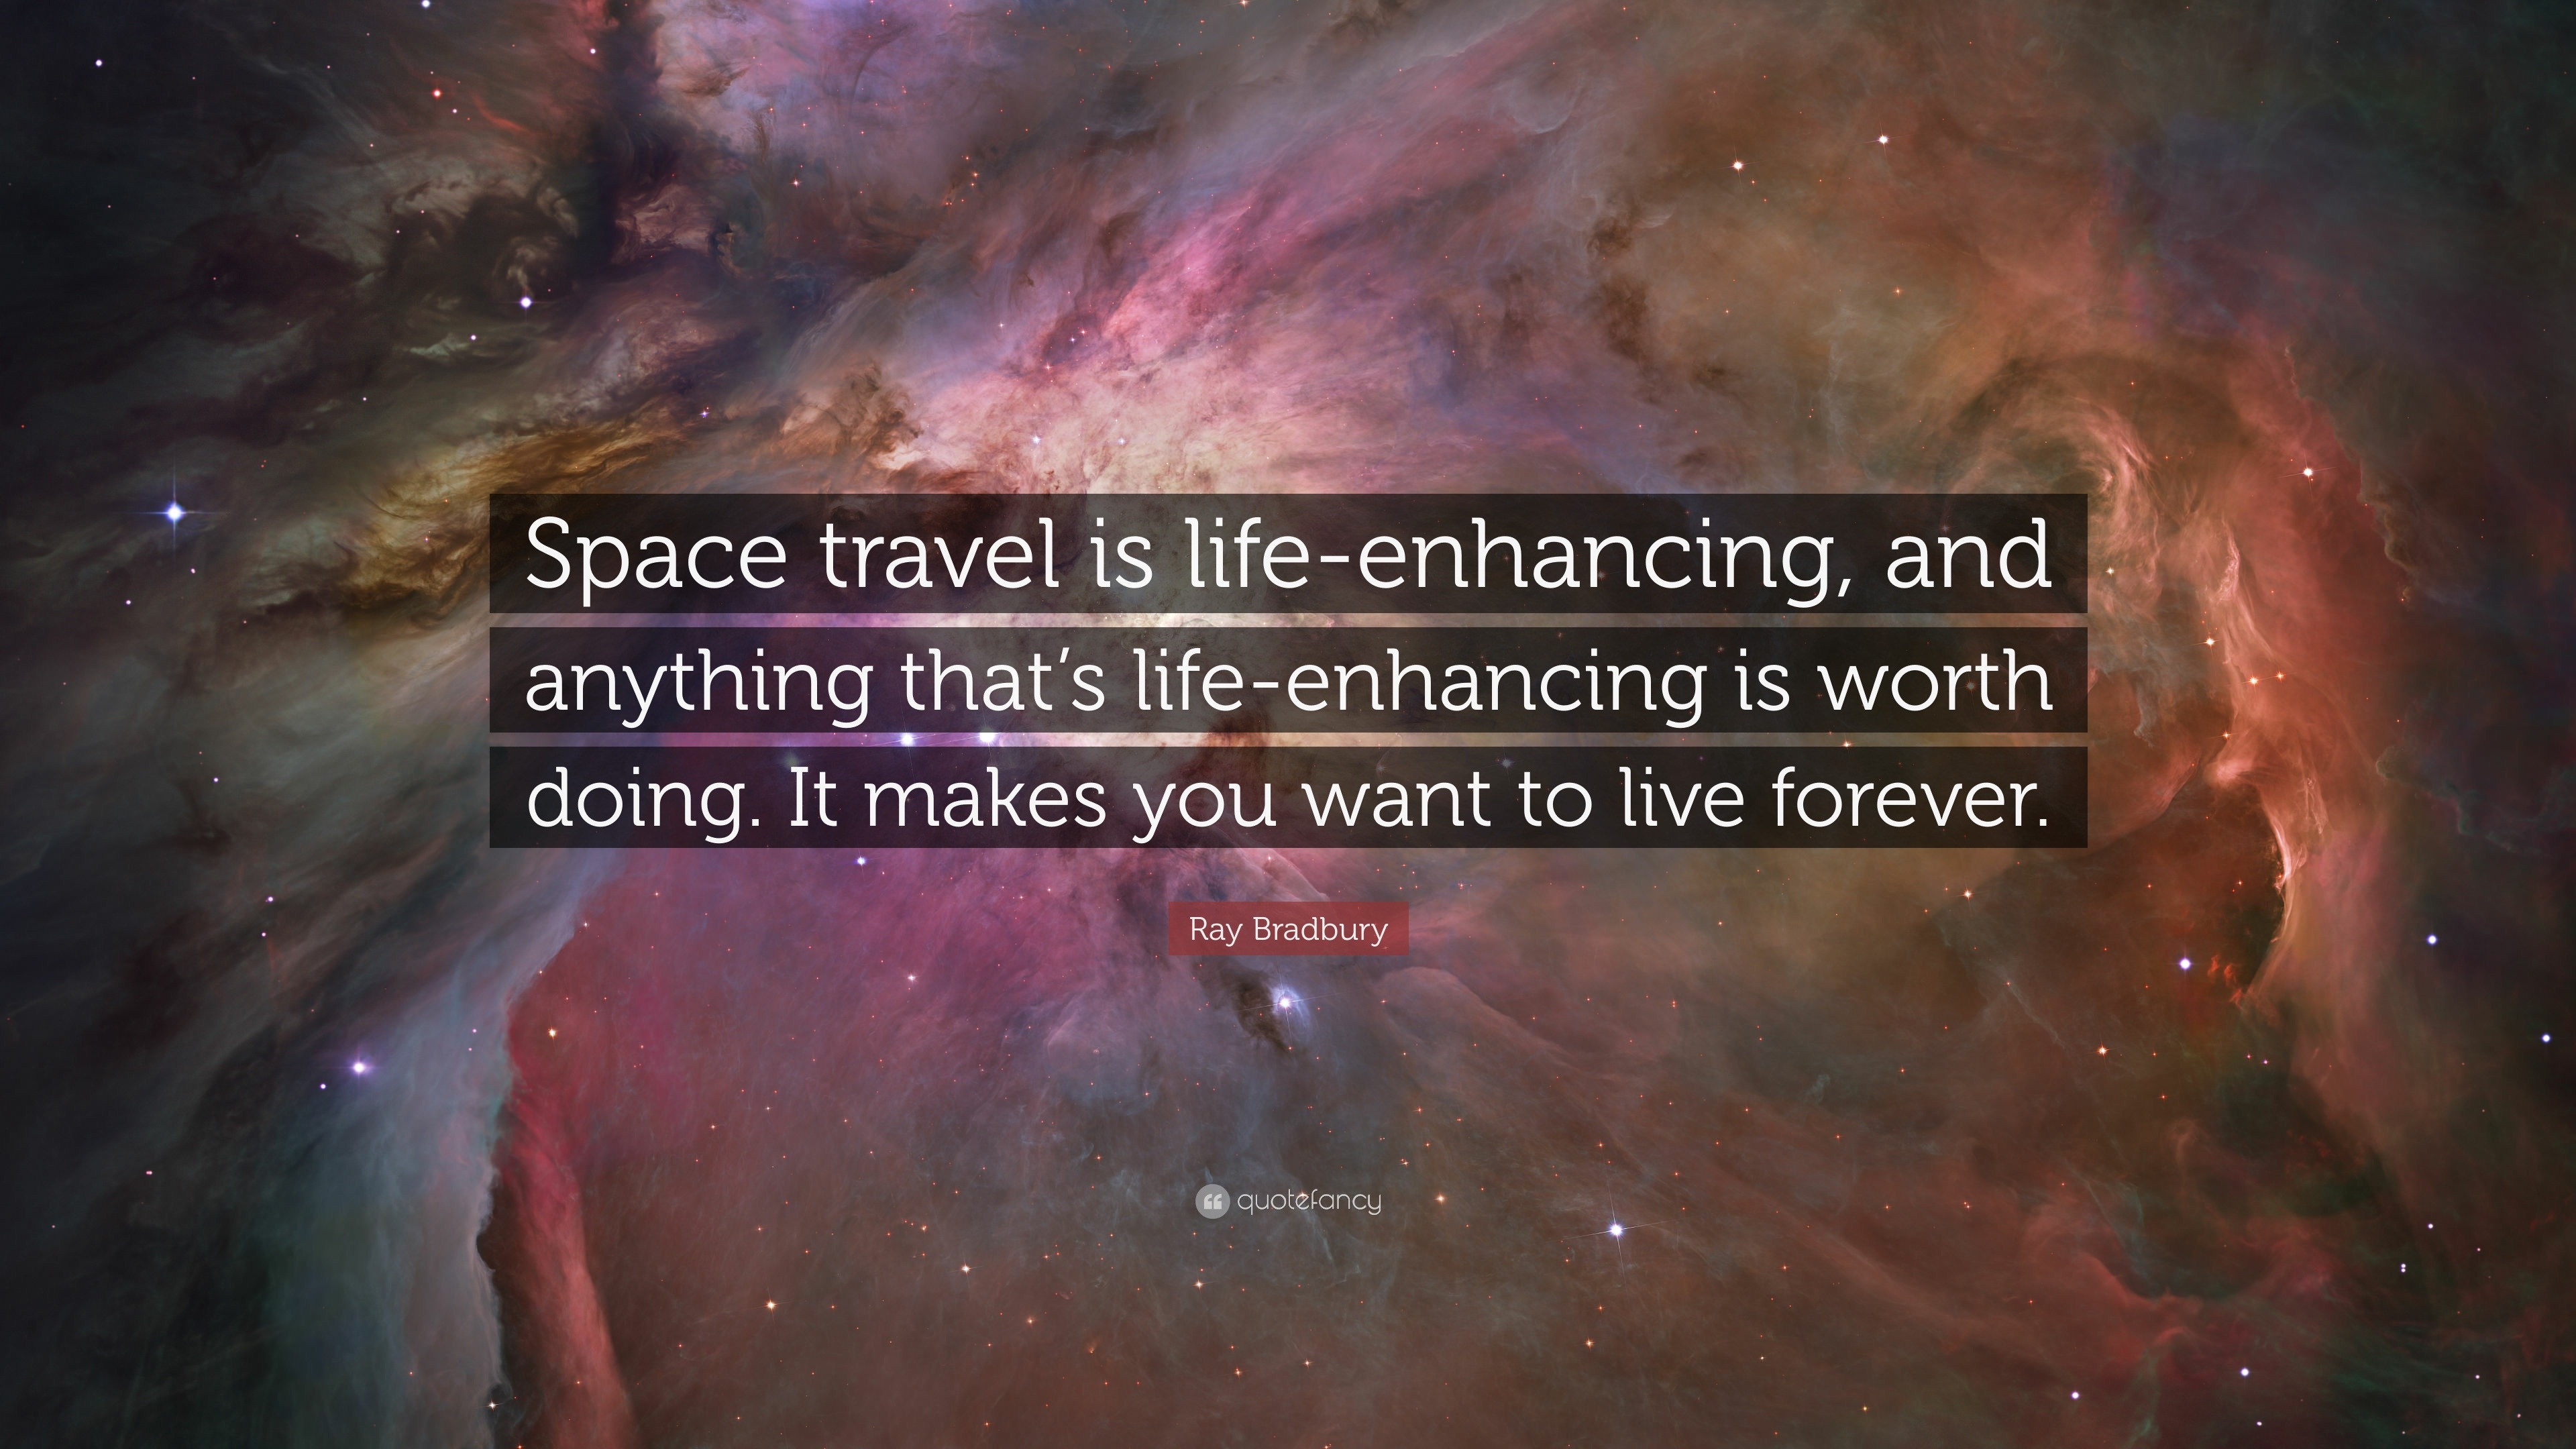 famous quotes about space travel